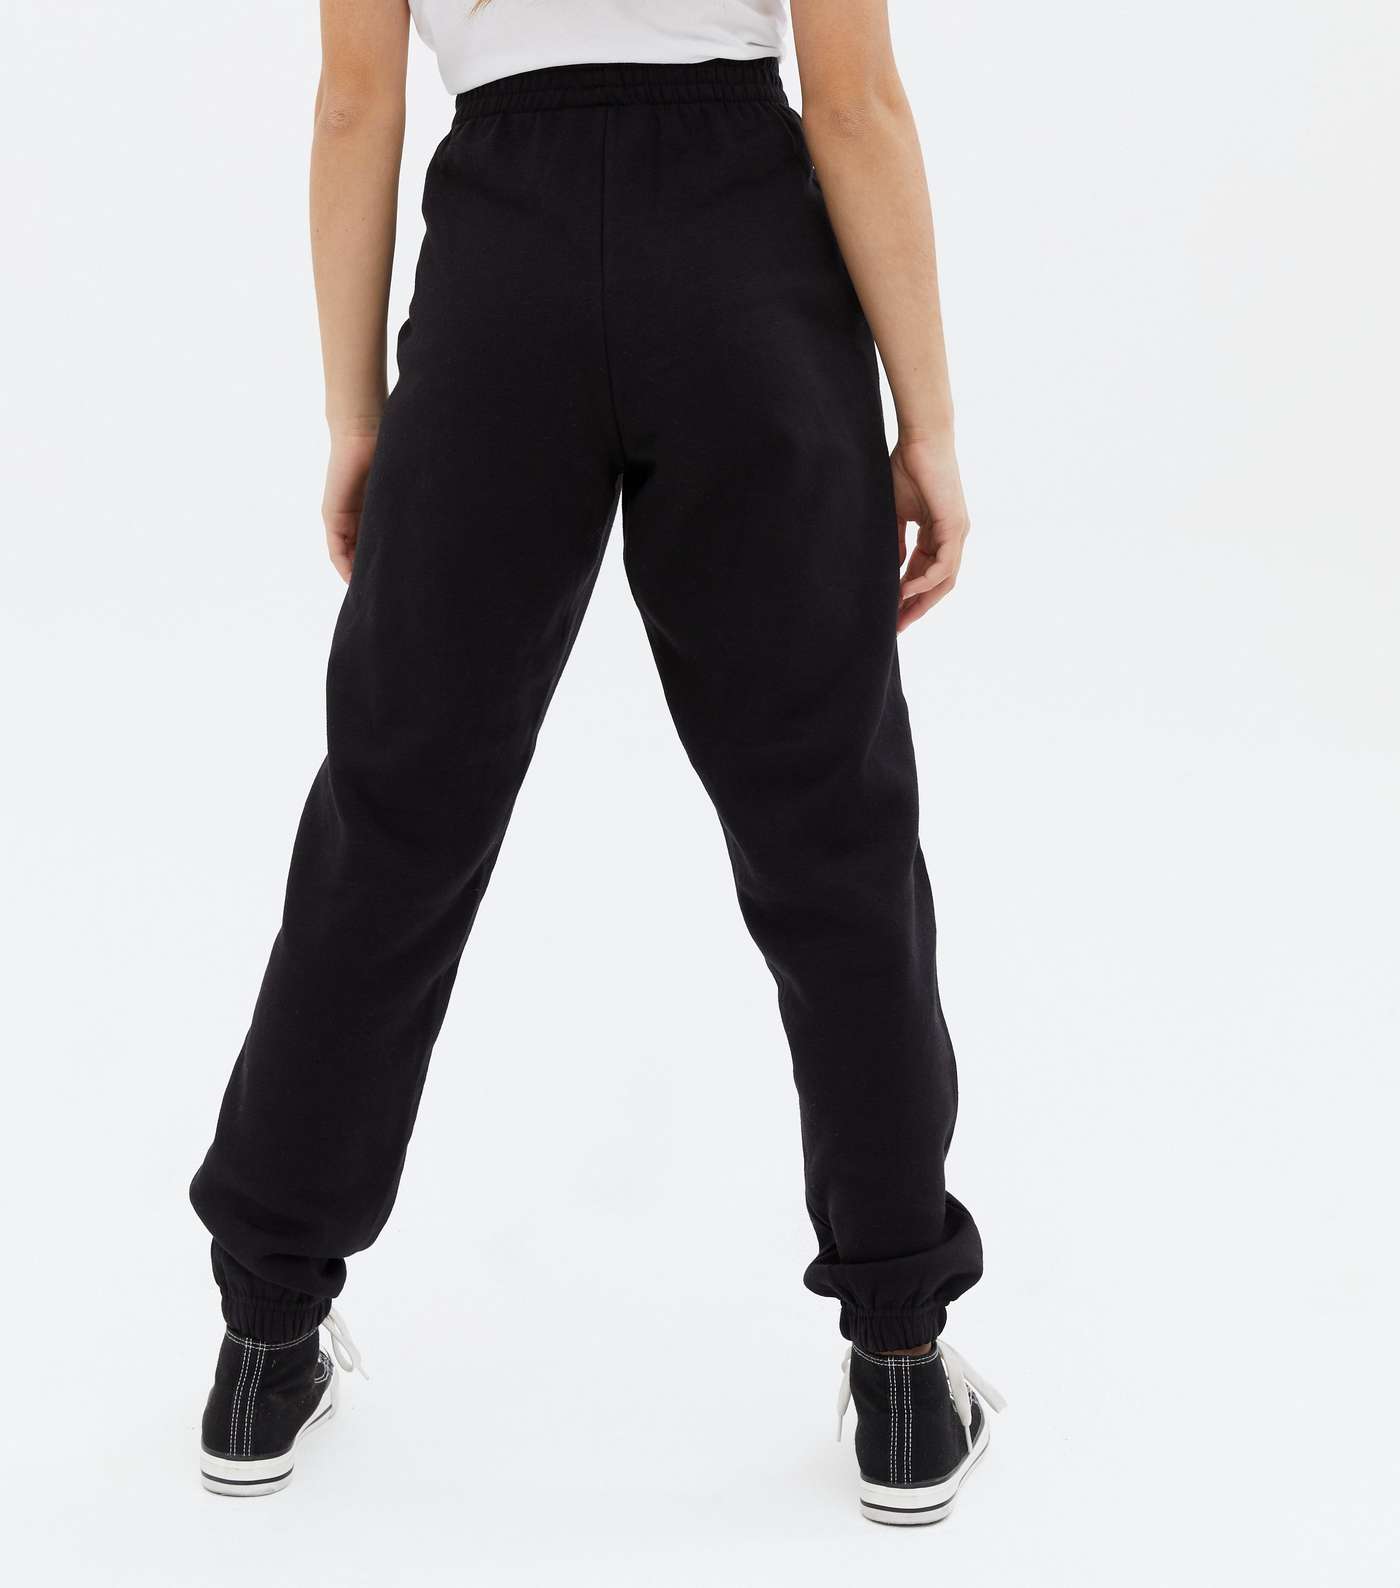 Girls 2 Pack Black and Grey Cuffed Joggers Image 4